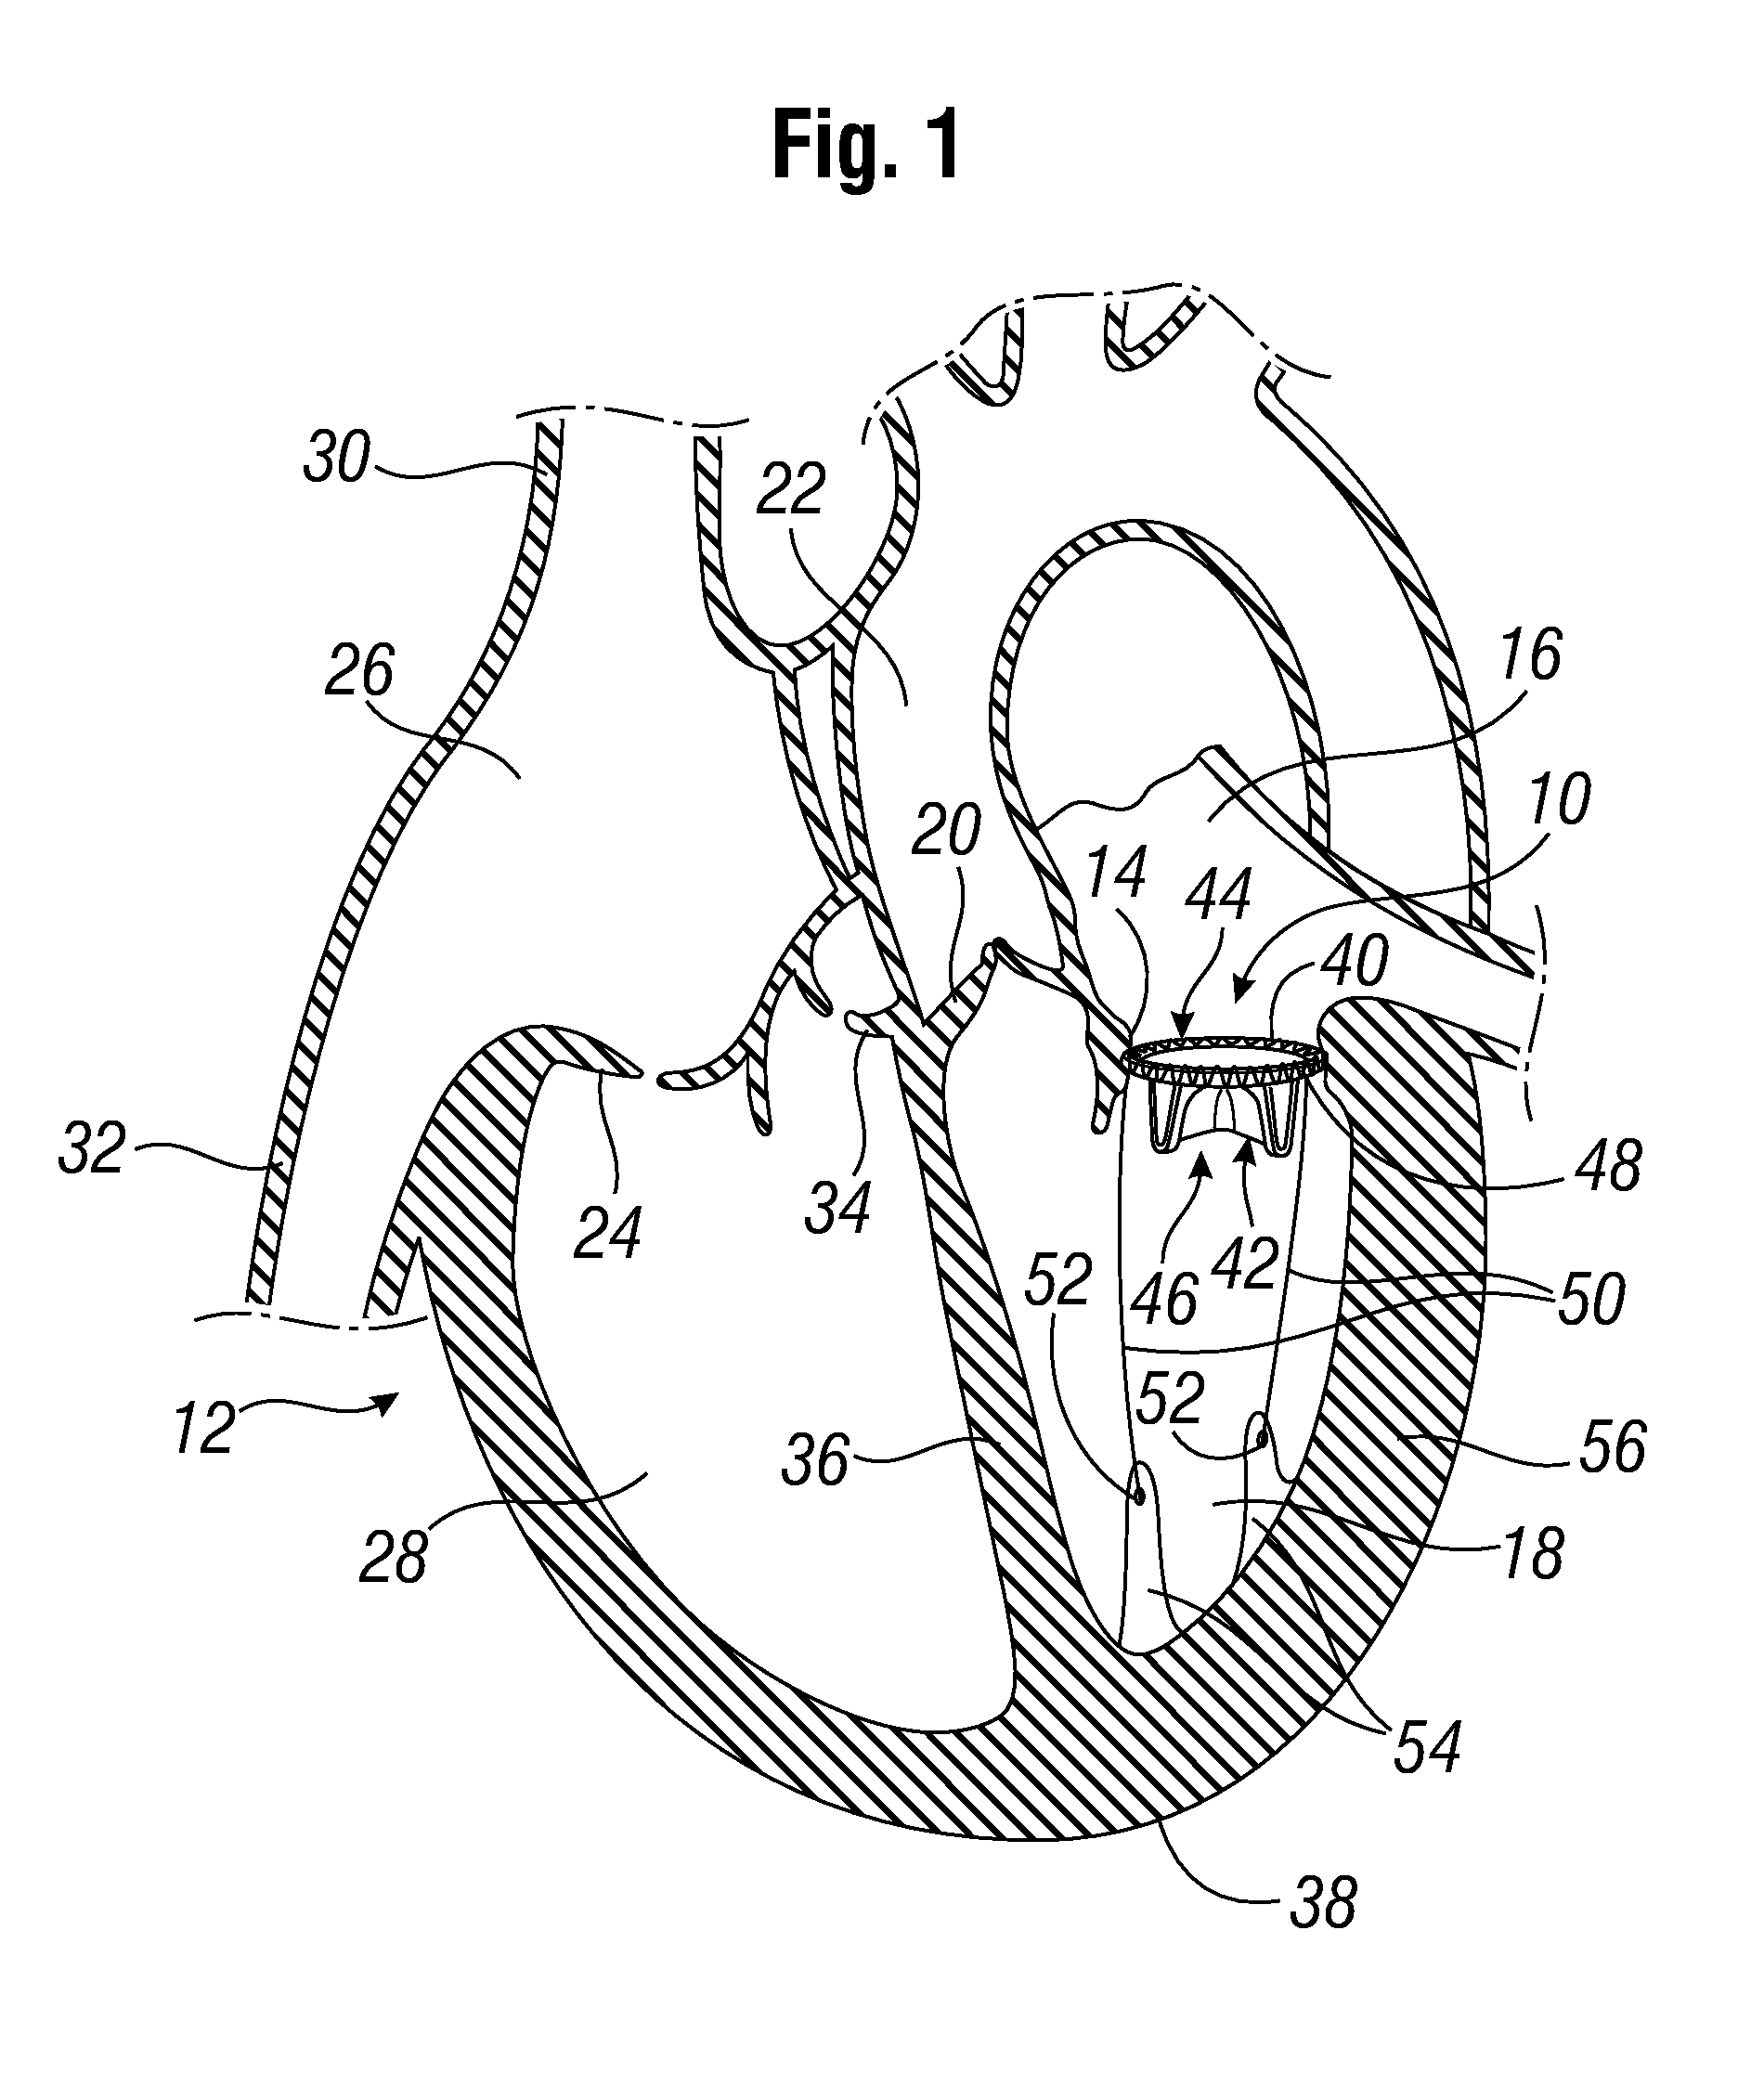 Prosthetic mitral valve with ventricular tethers and methods for implanting same